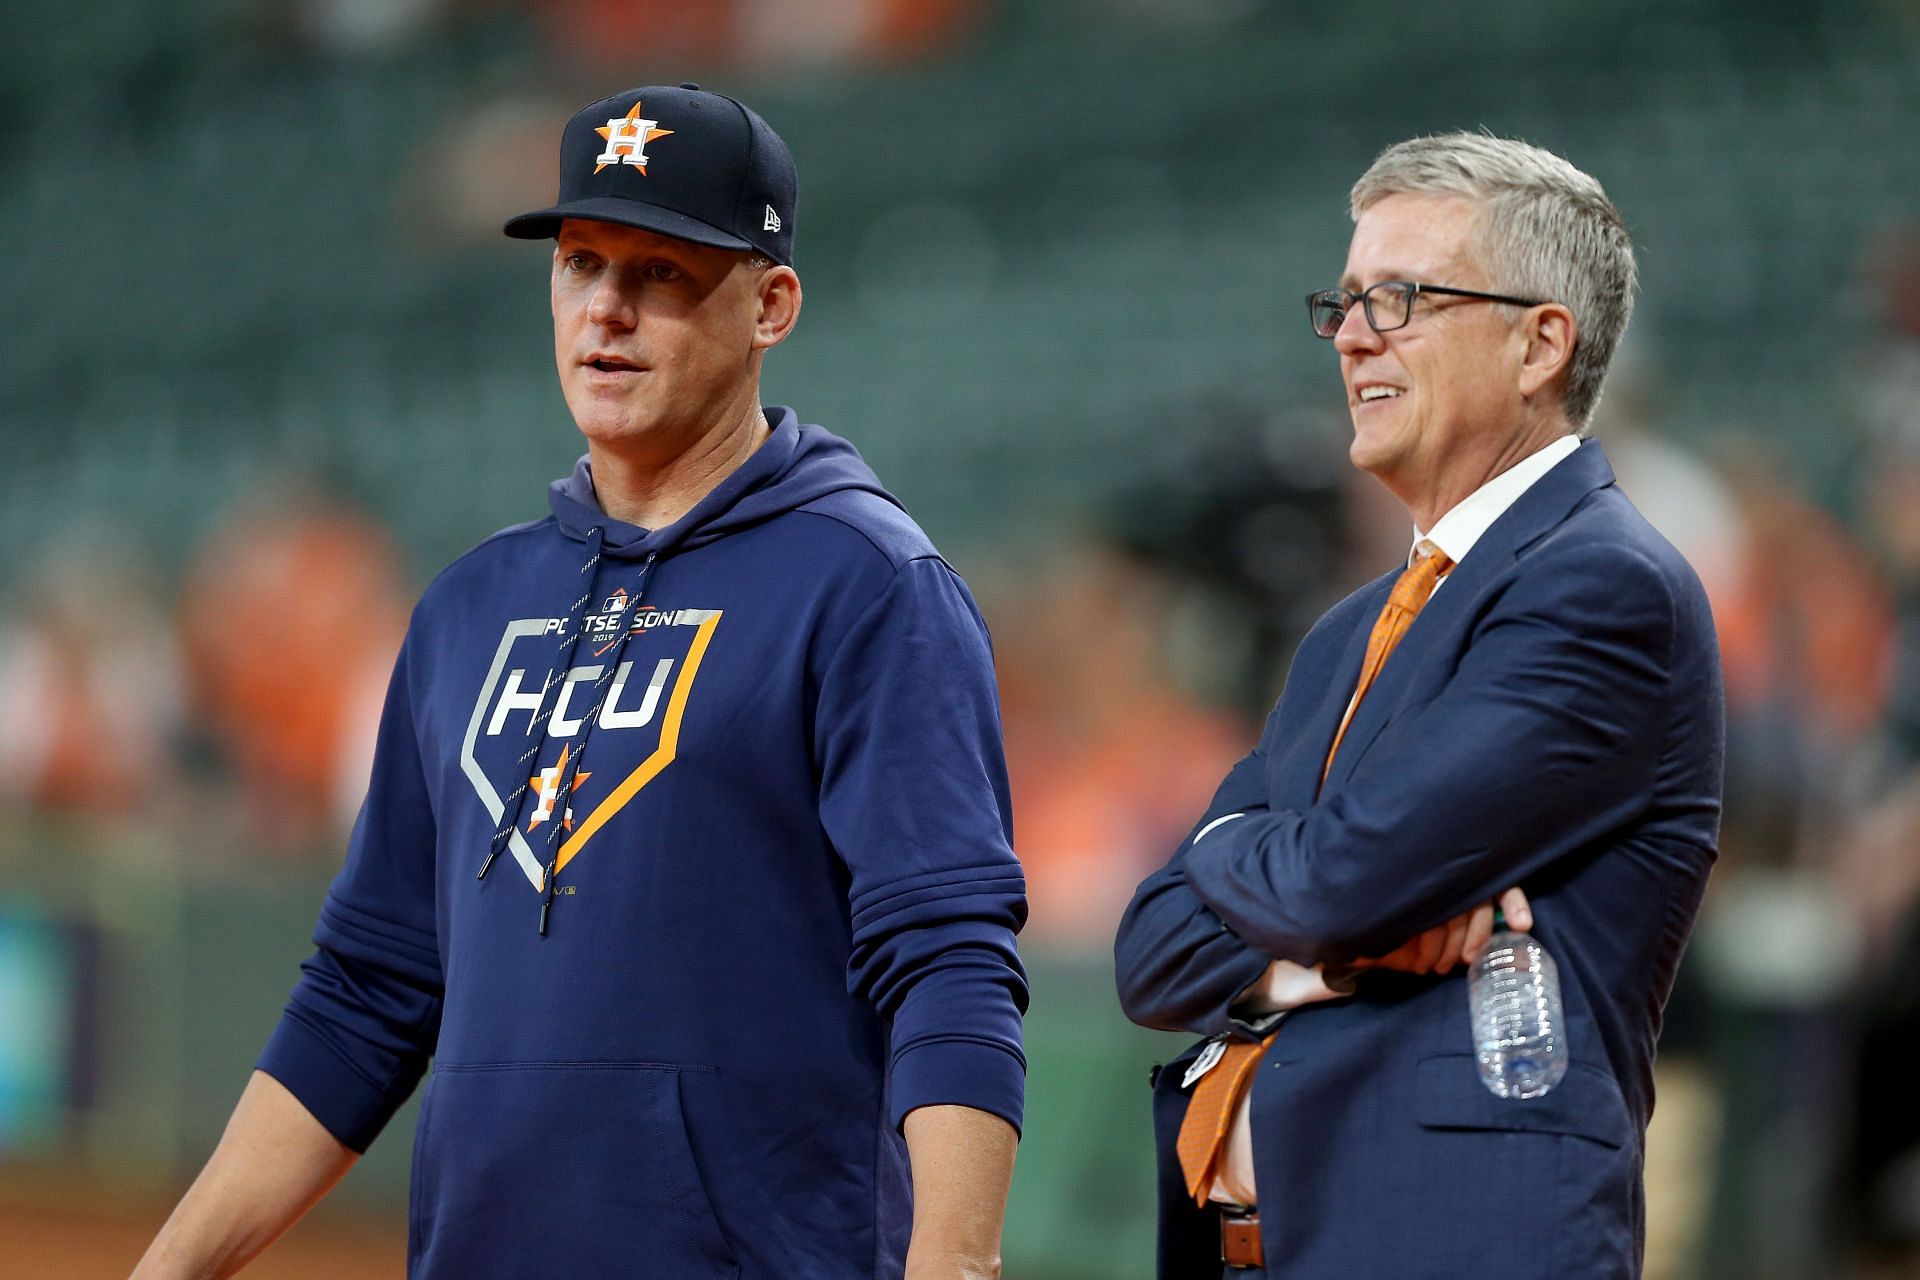 Tigers manager A.J. Hinch talks Astros, scandal and why Houston is